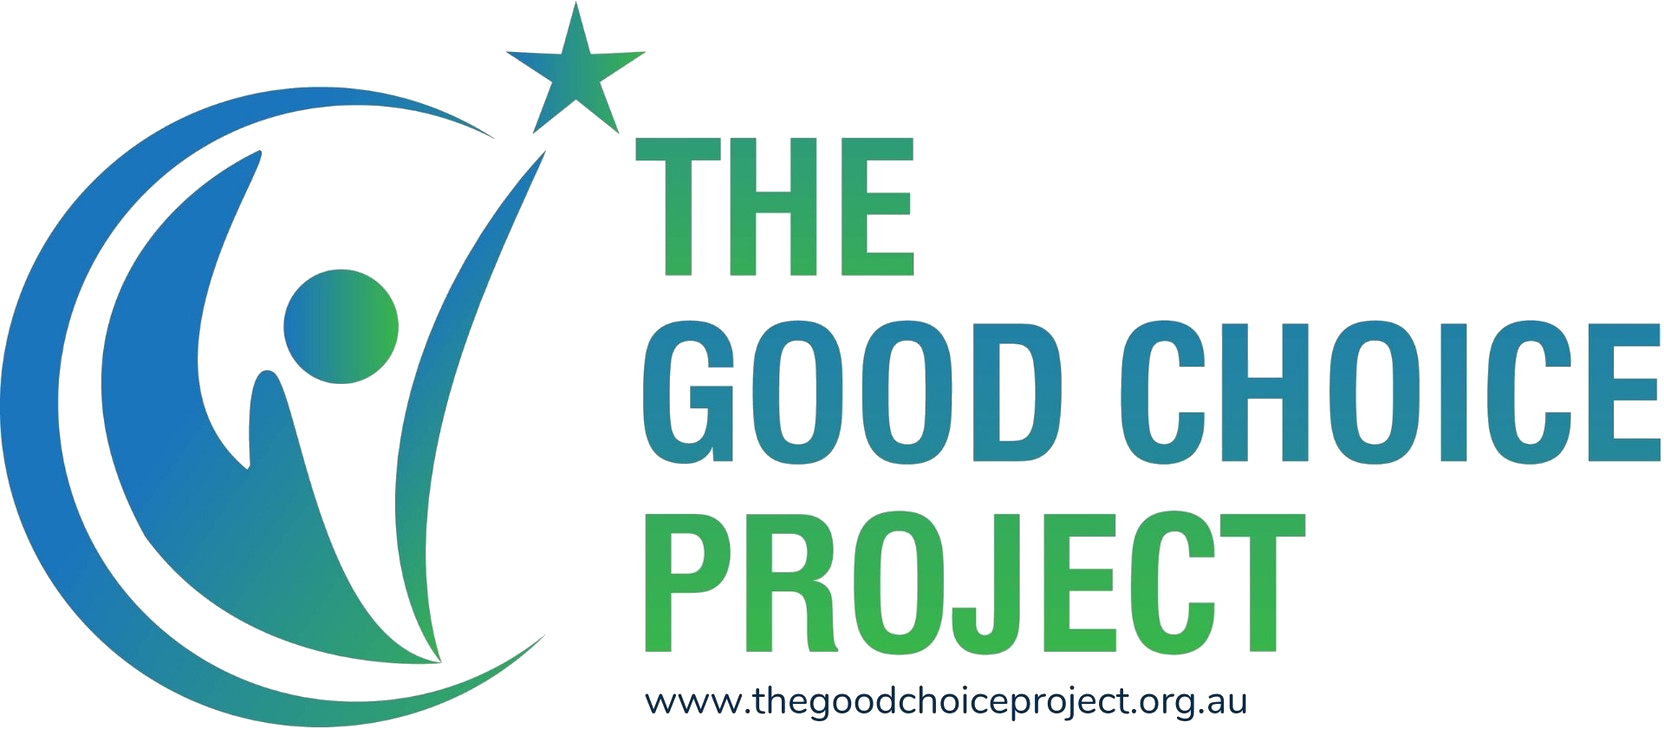 The Good Choice Project